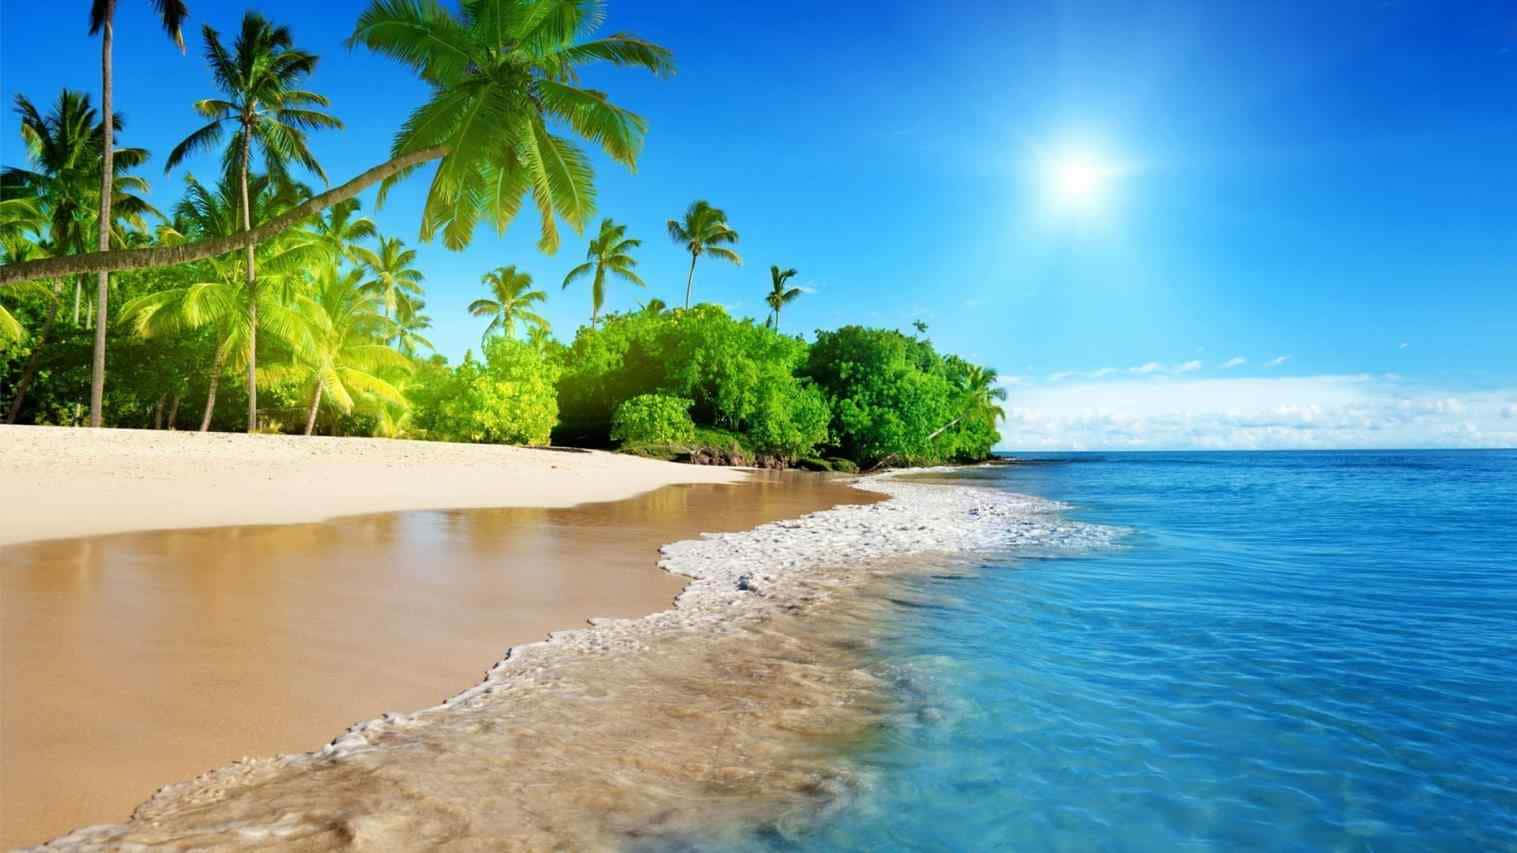 Download A Beach With Palm Trees And Water Wallpaper